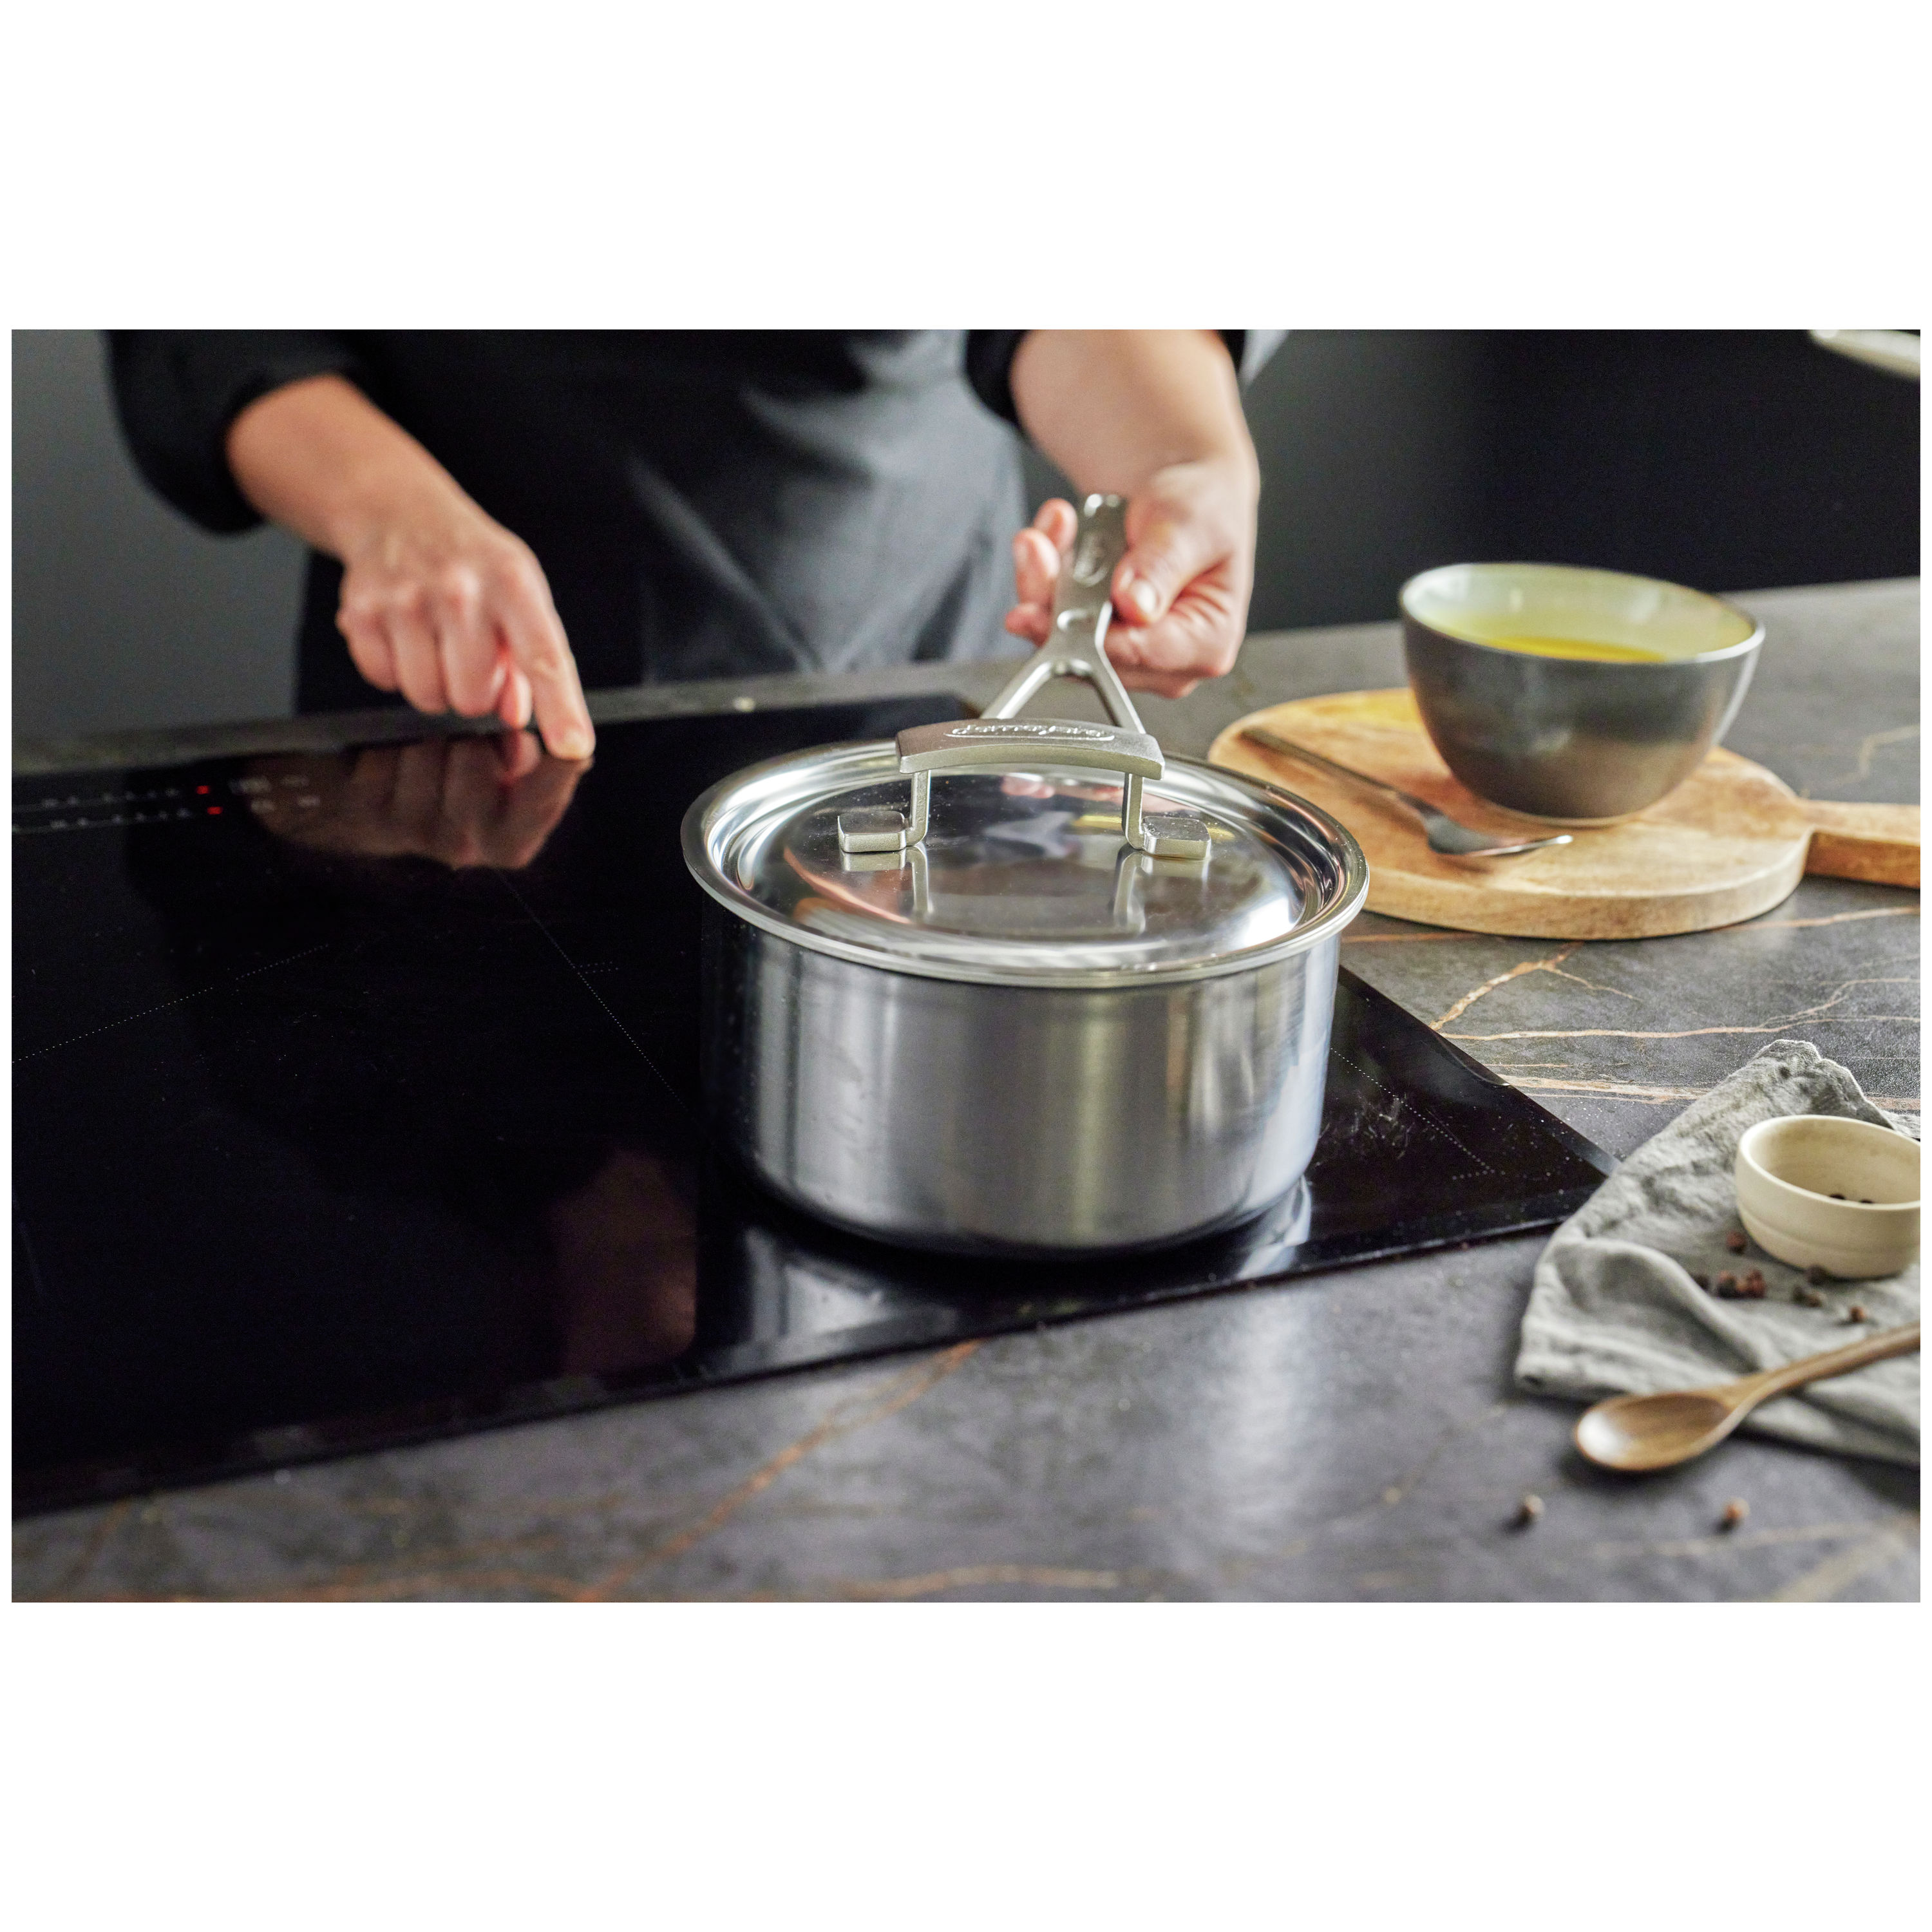 CUISINE COOKWARE COMMAND PERFORMANCE 18/10 STAINLESS STEEL 3QT POT WITH LID